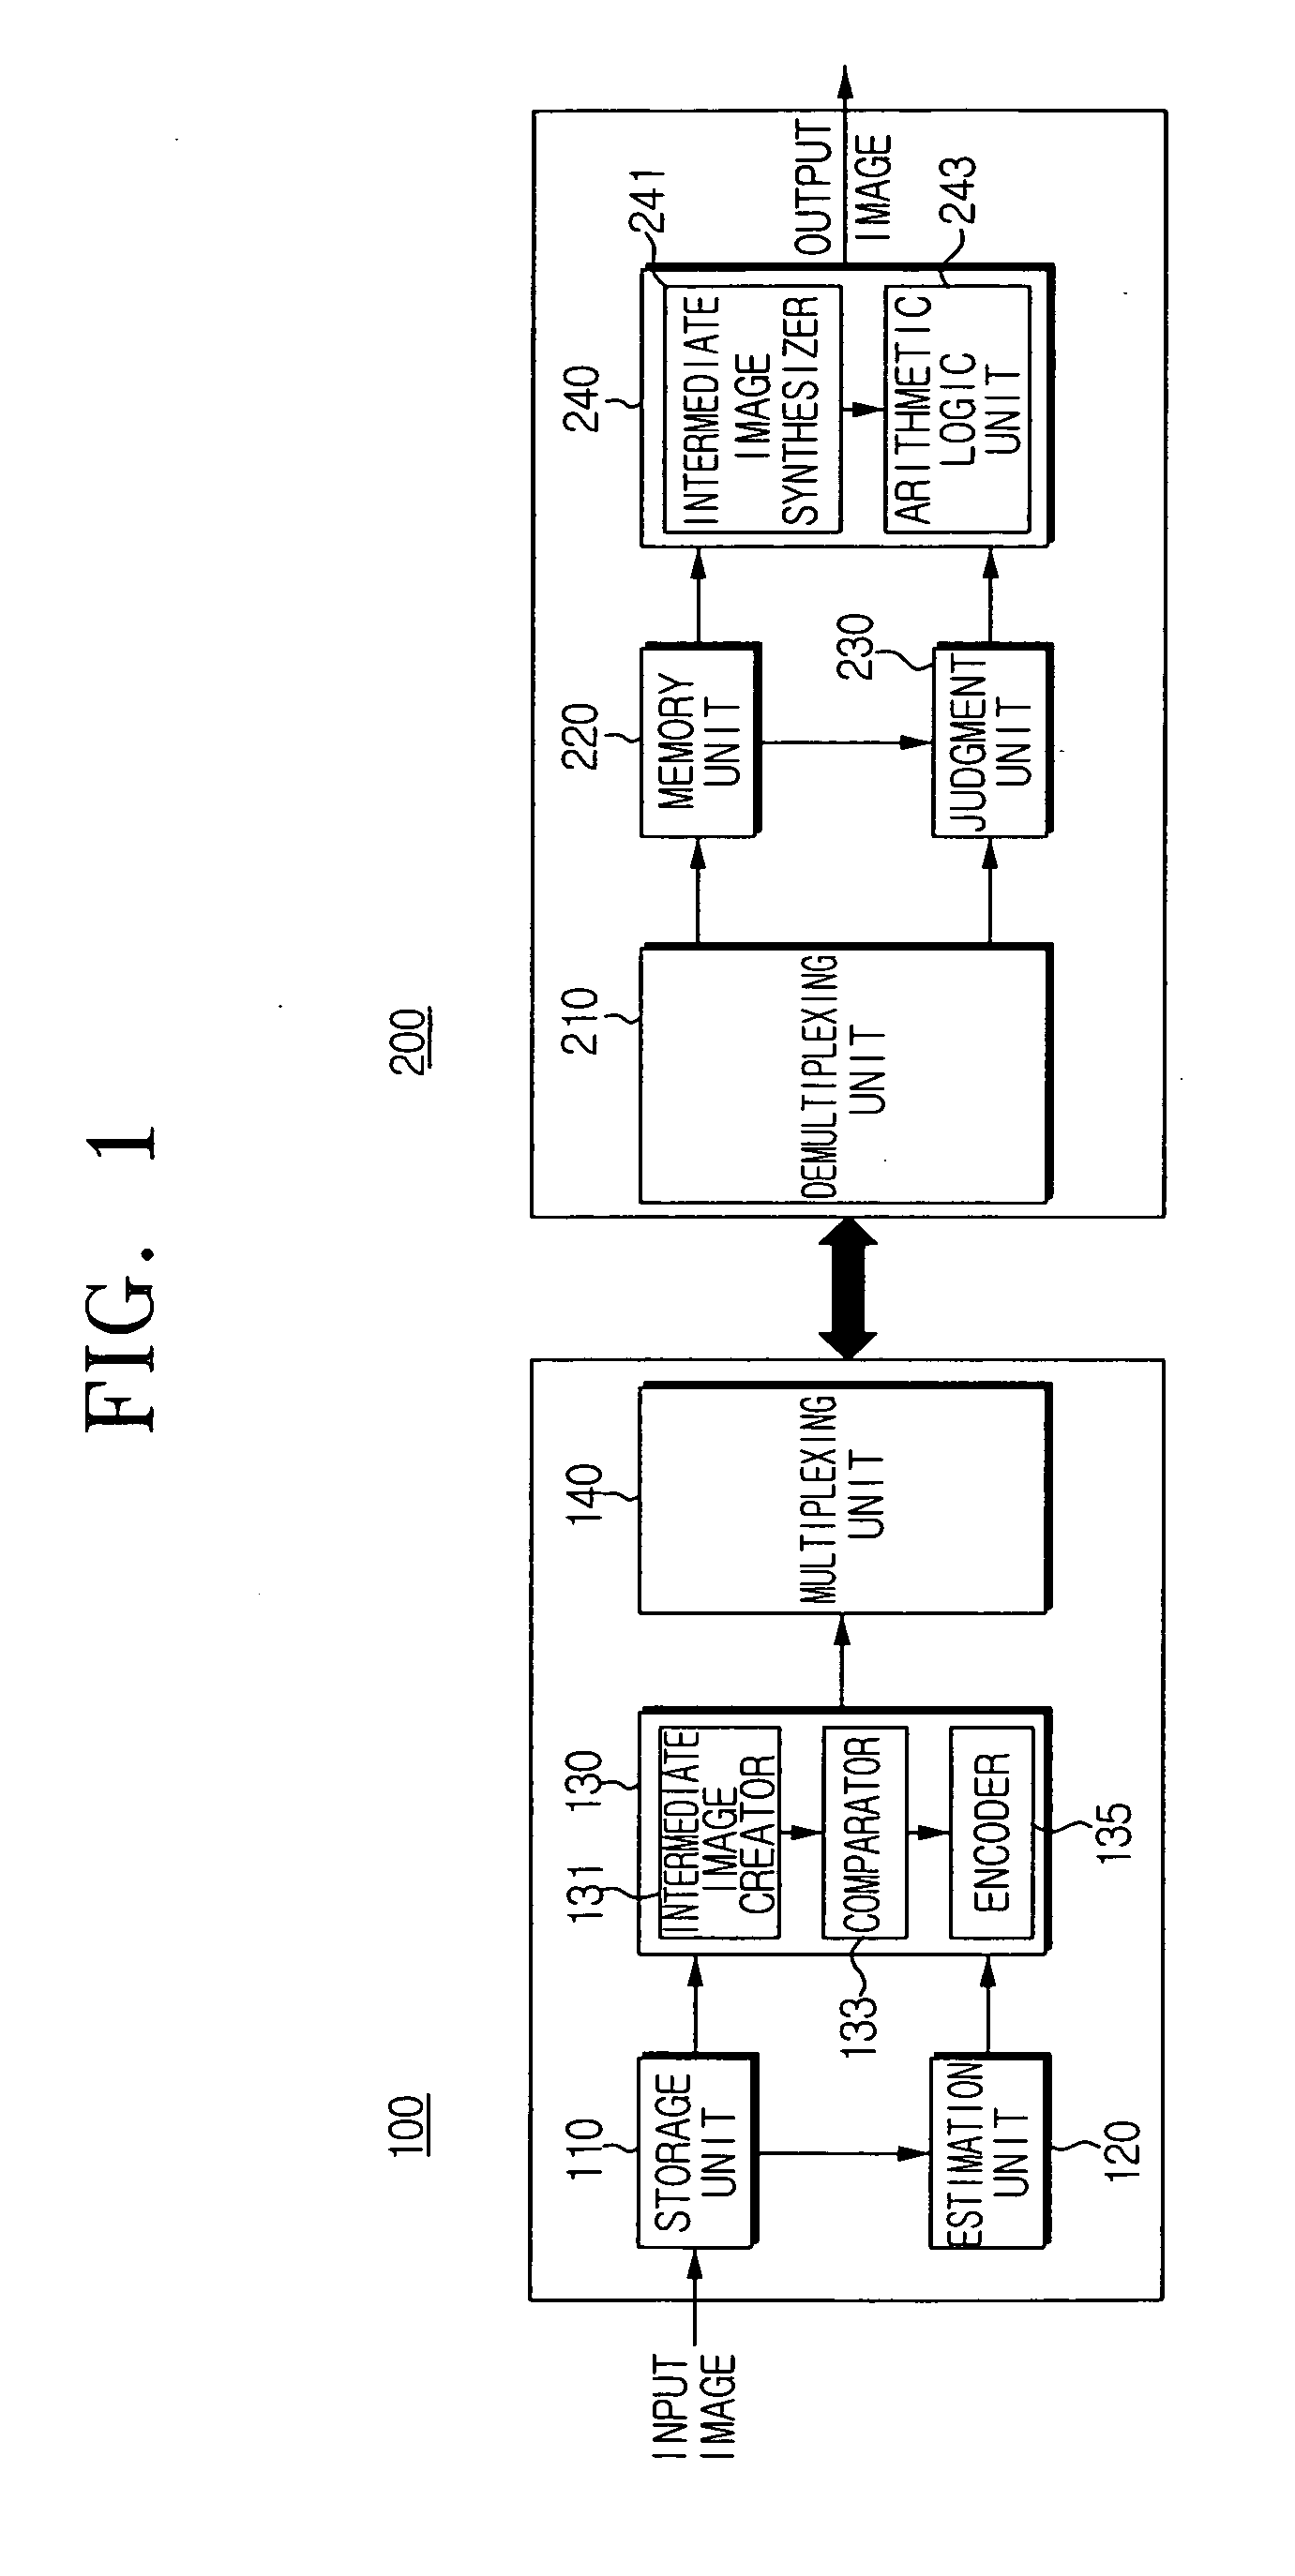 Multi-view stereo imaging system and compression/decompression method applied thereto